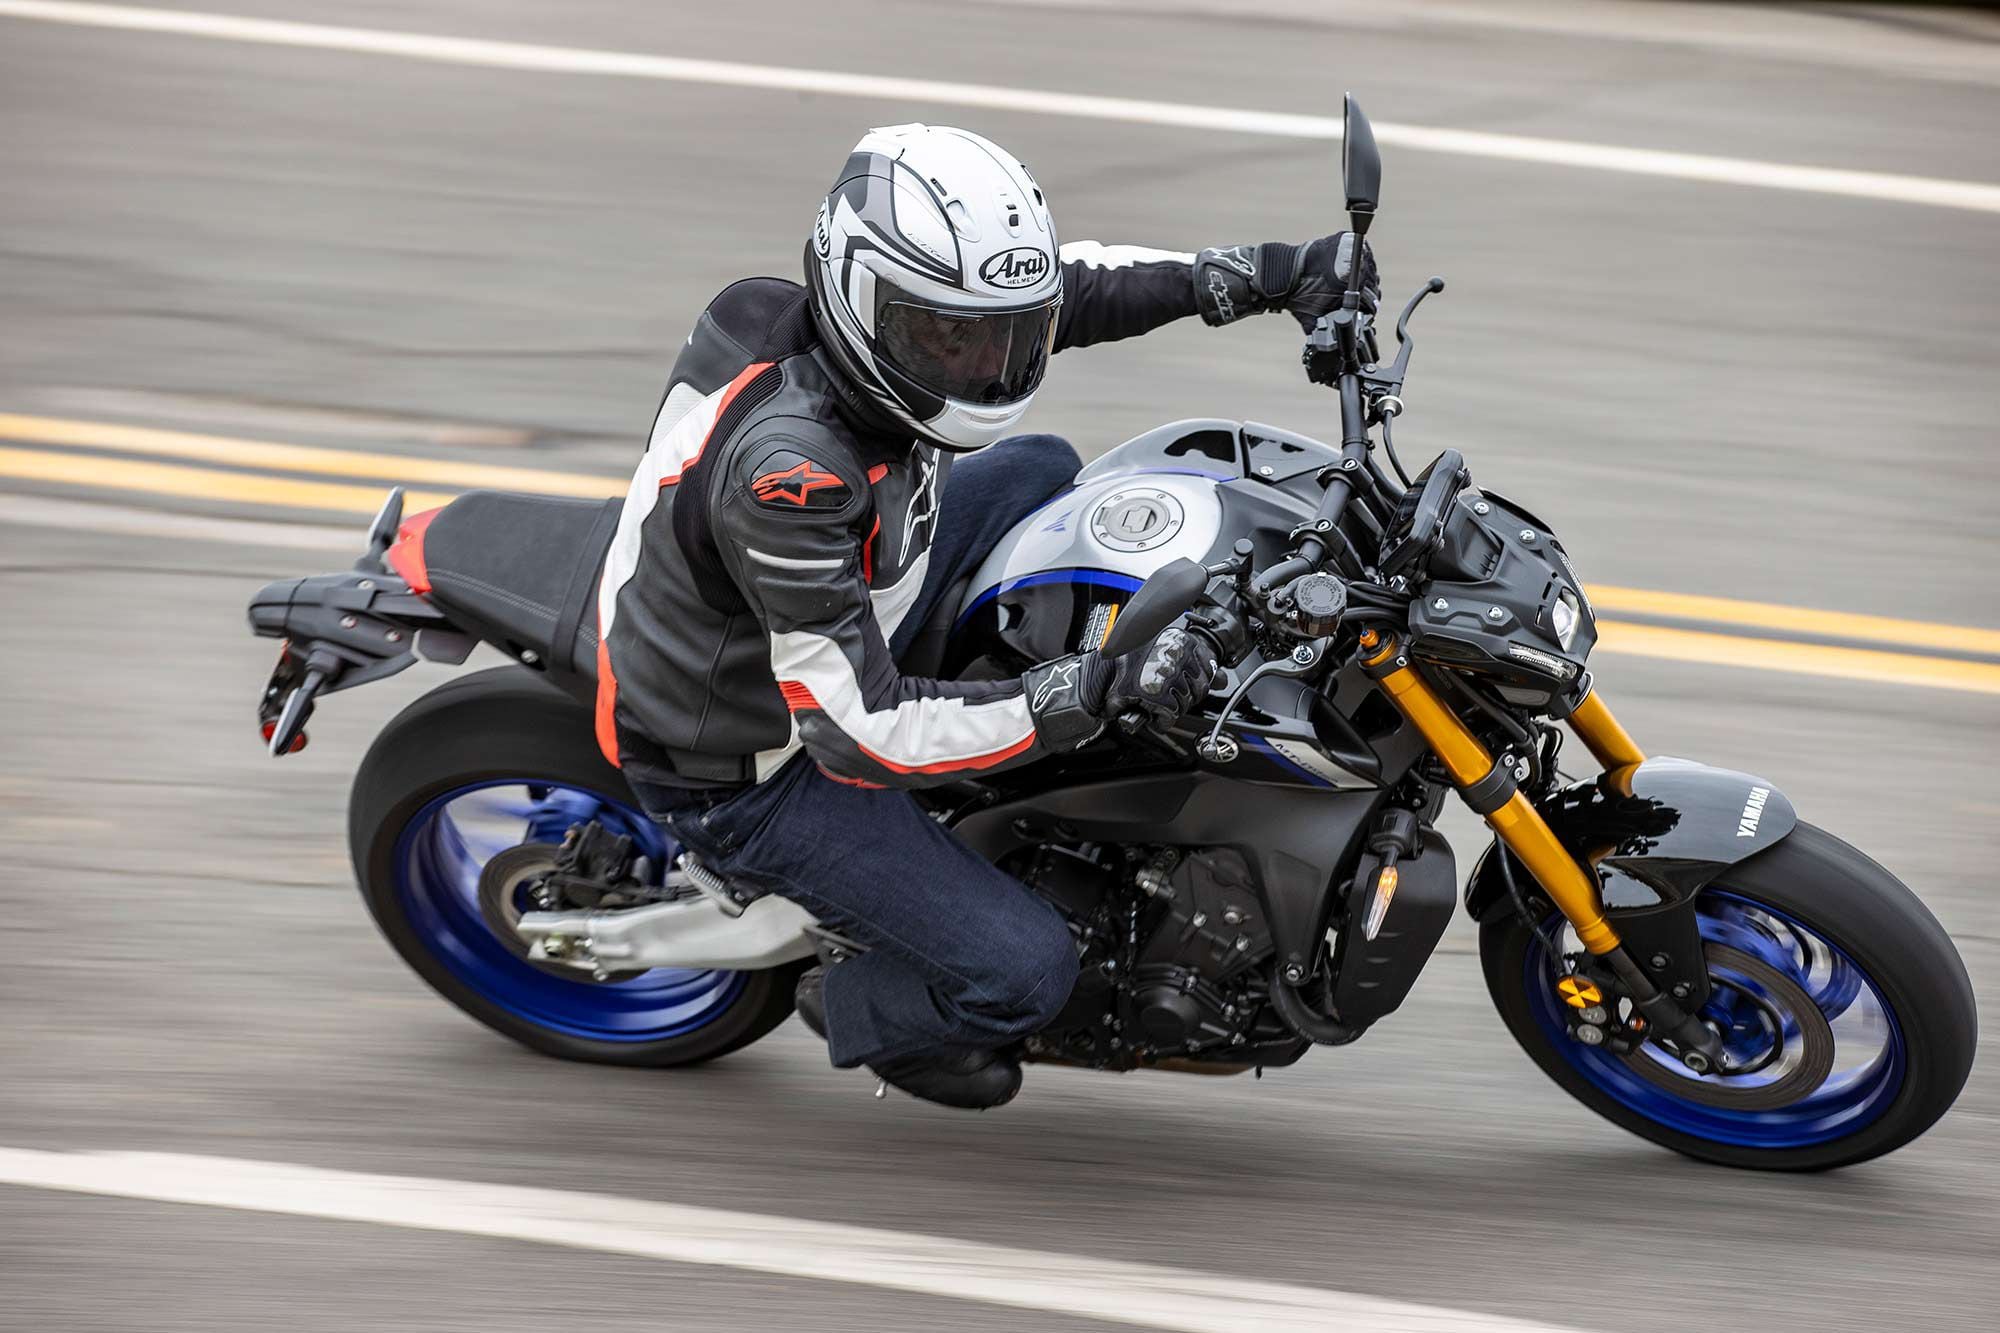 Essential Guide To Gear for New Motorcyclists